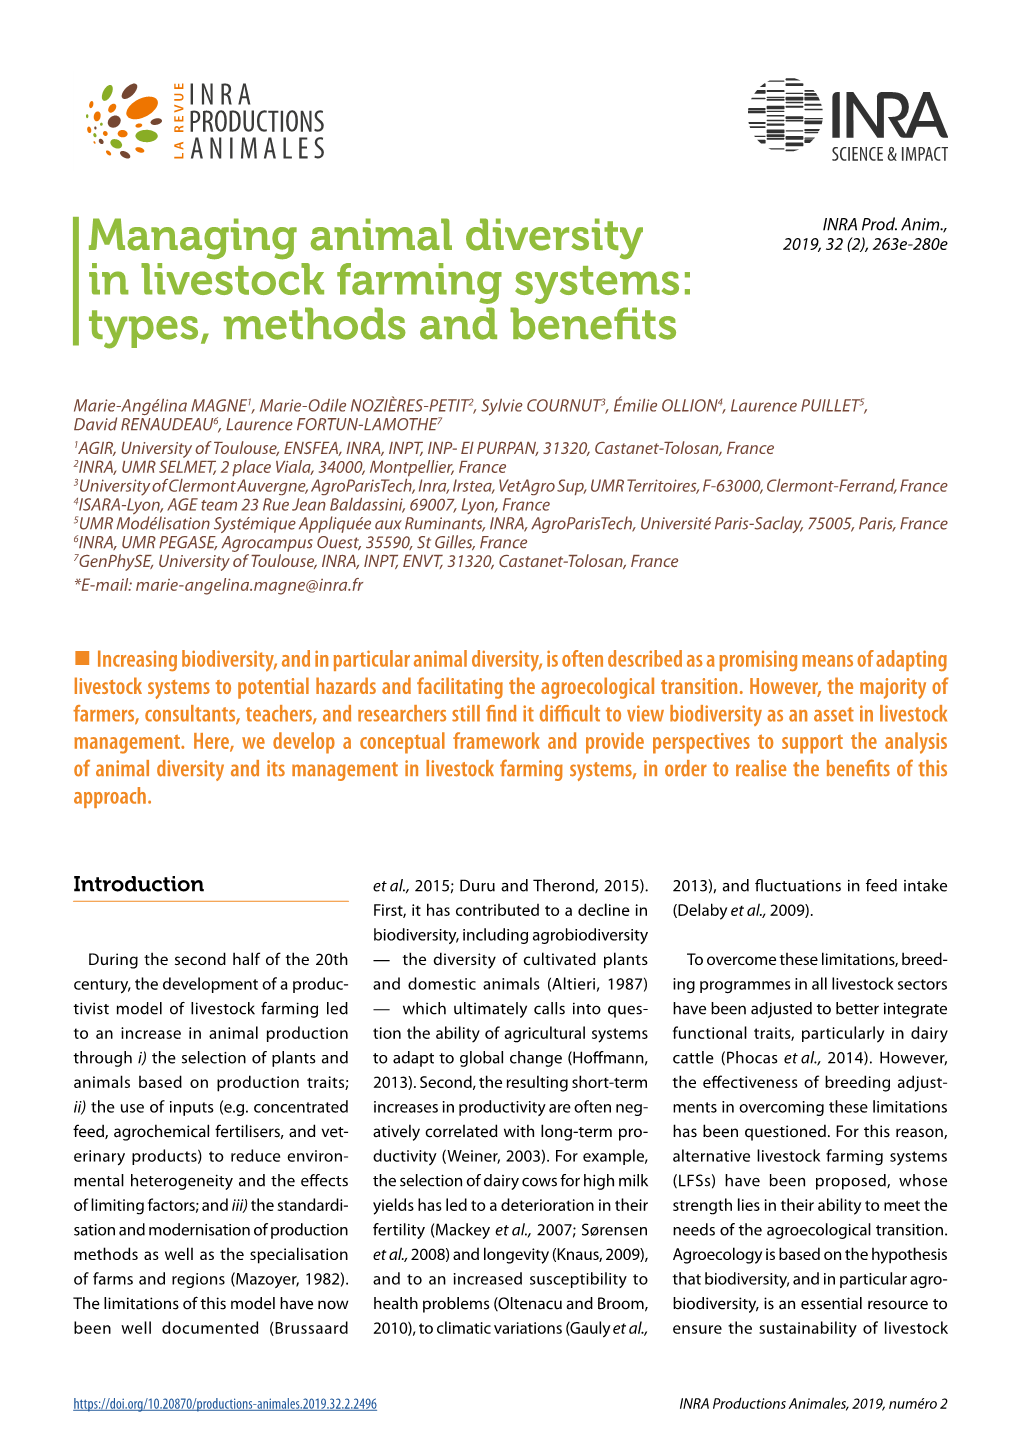 Managing Animal Diversity in Livestock Farming Systems: Types, Methods and Benefits /265E